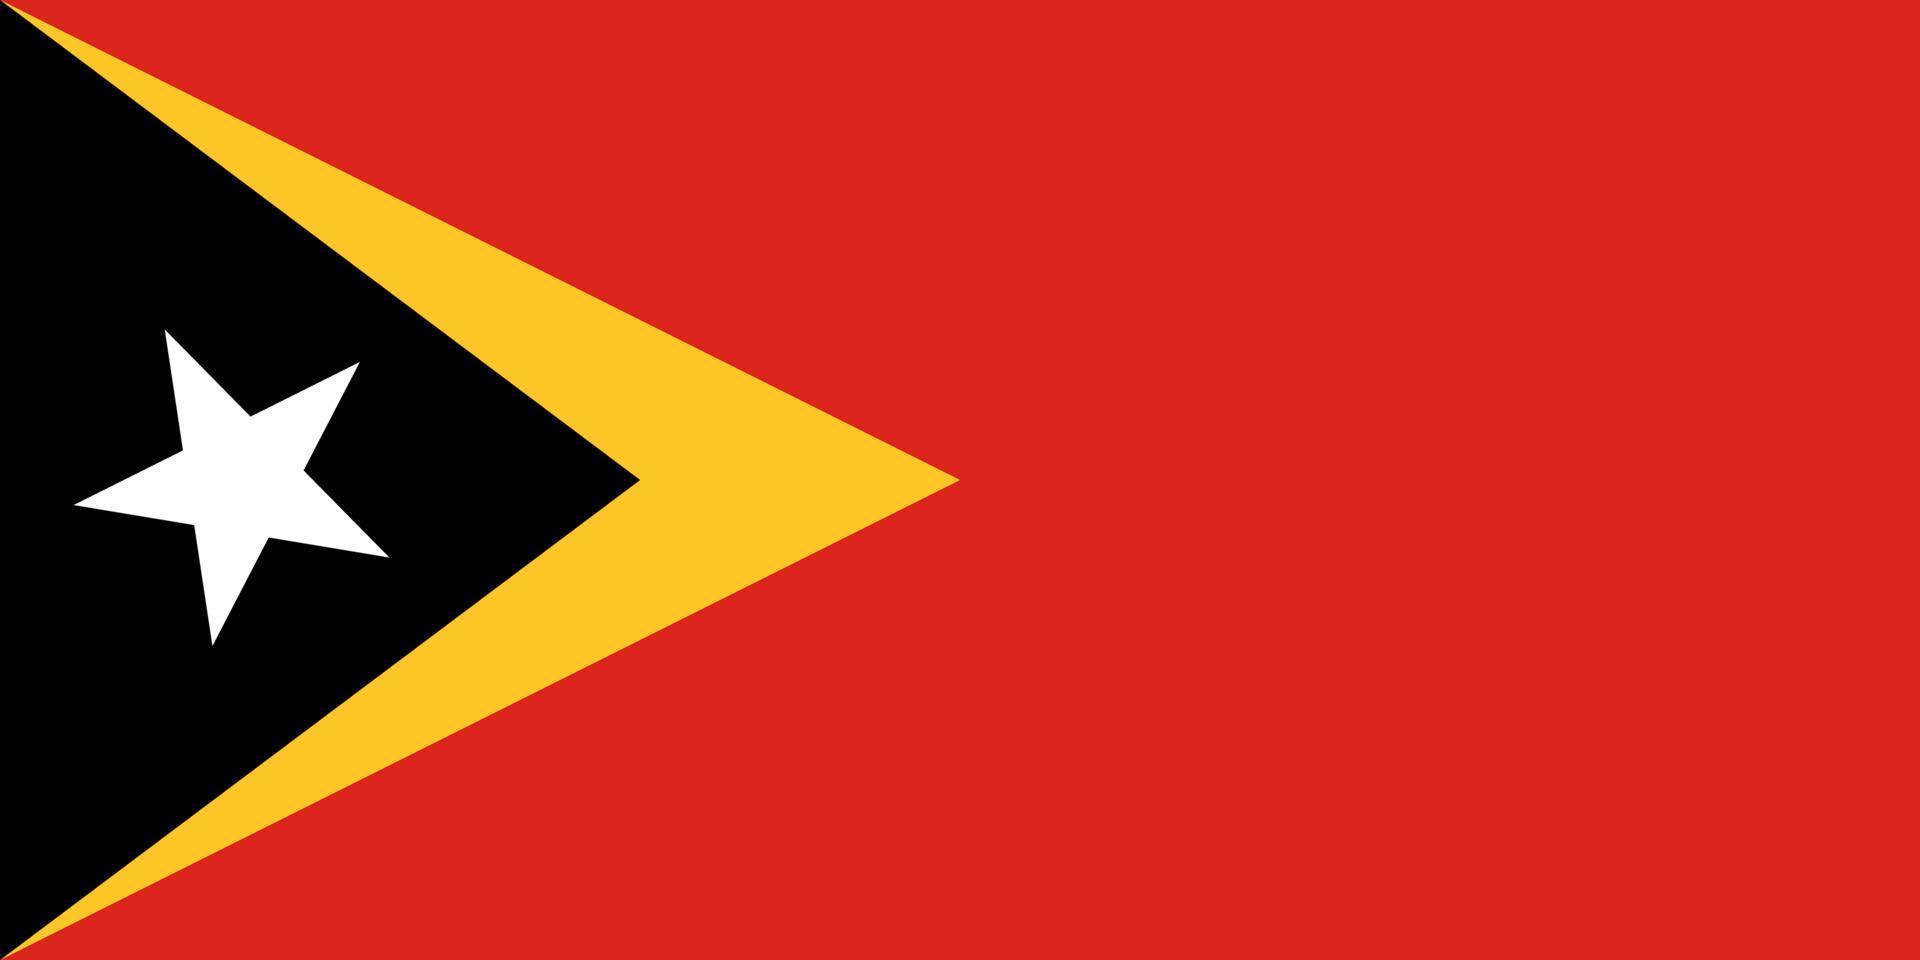 East Timor Simple flag Correct size, proportion, colors. vector